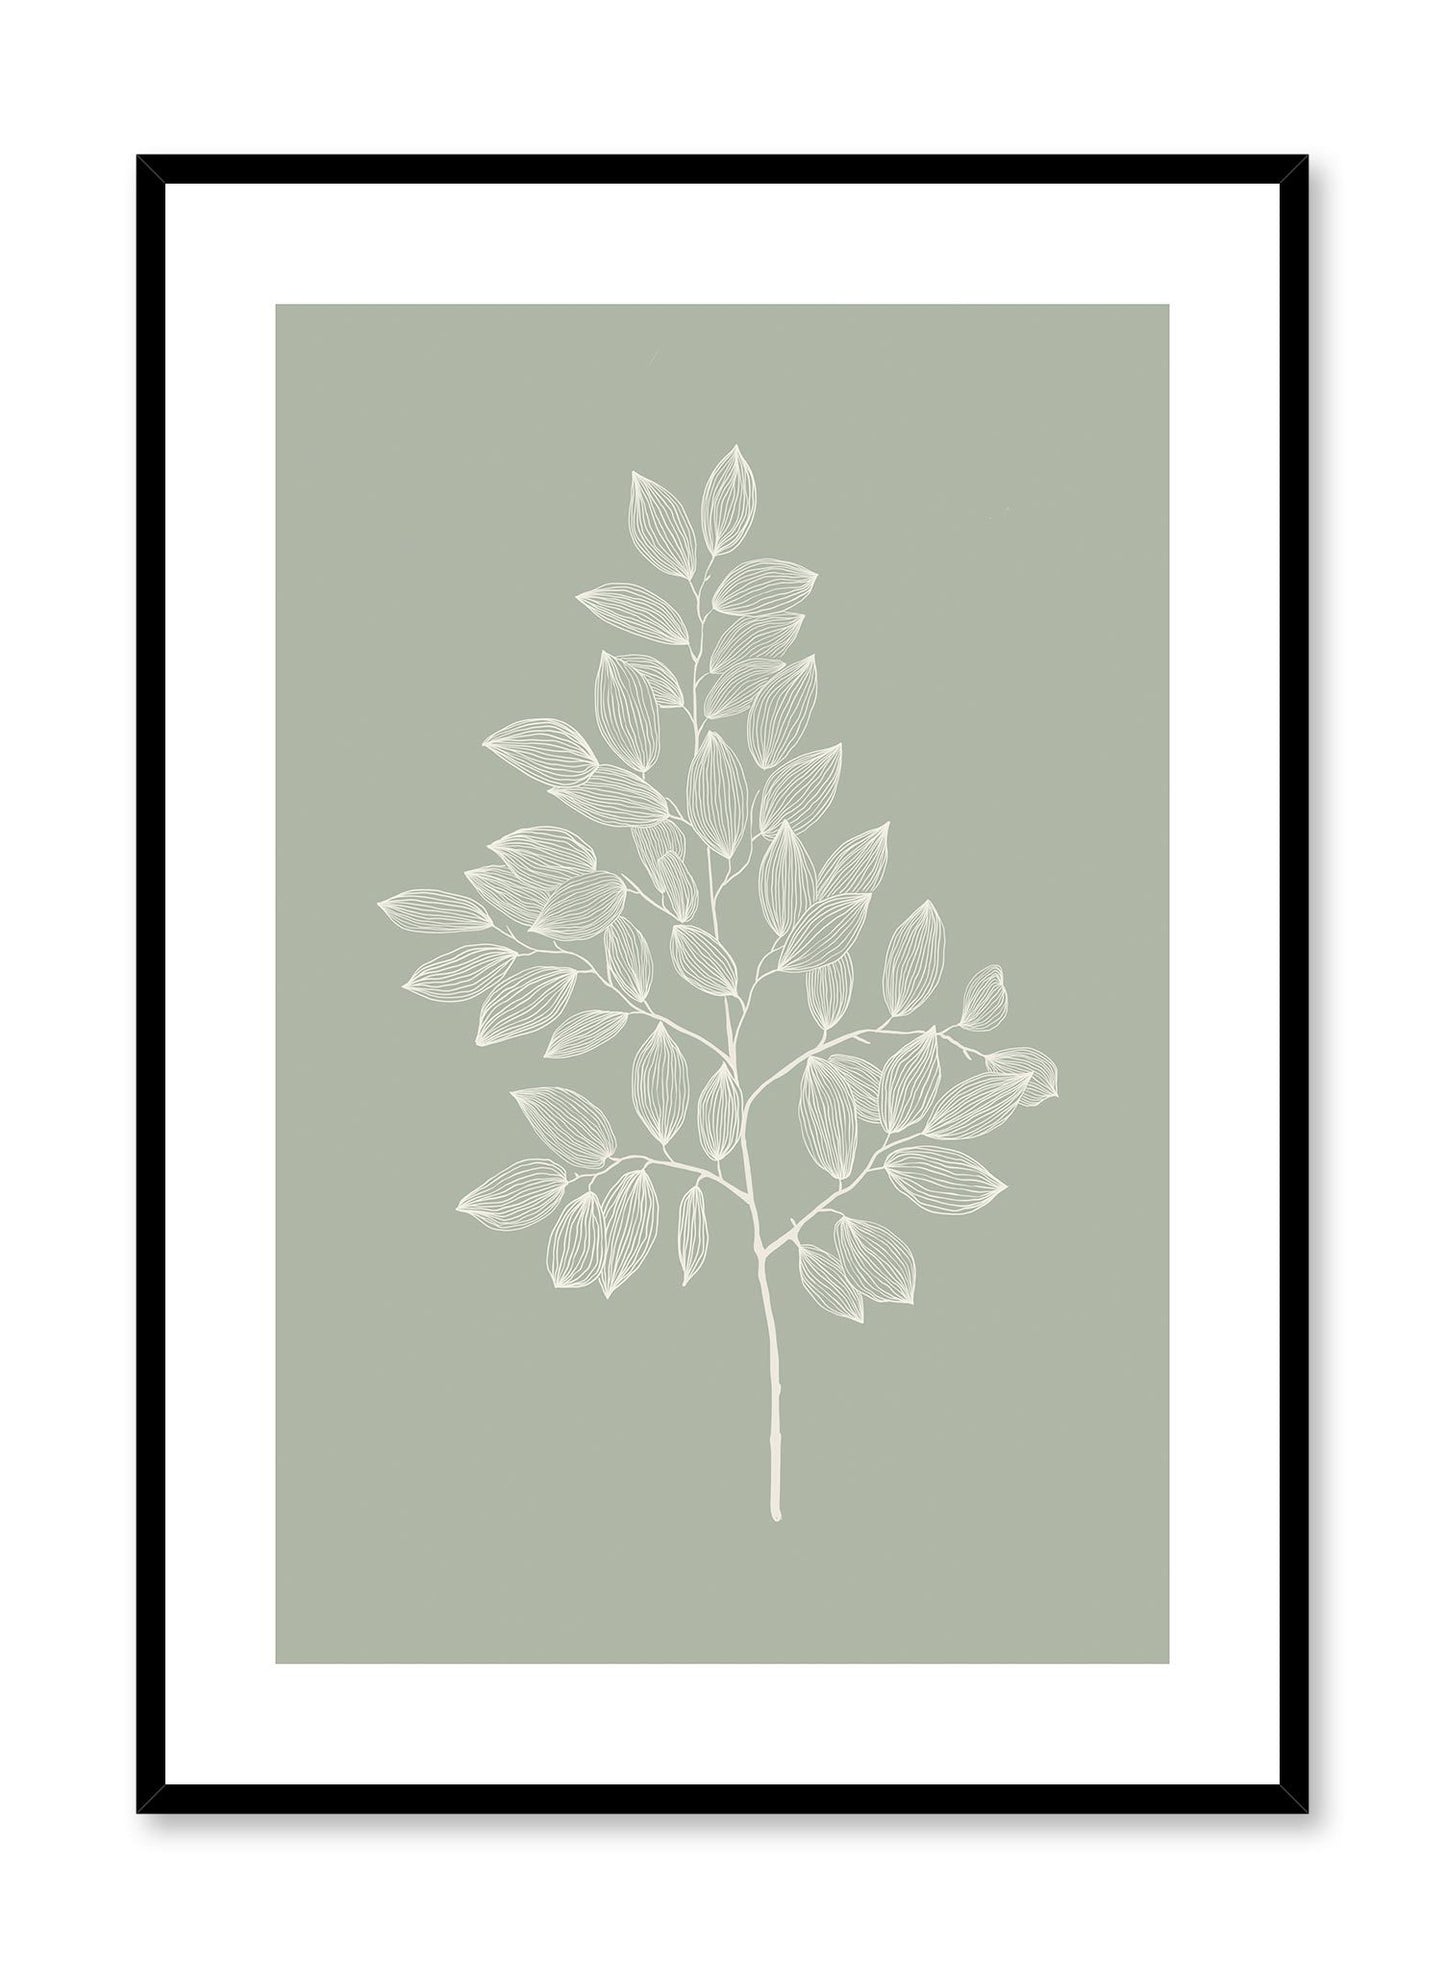 Leafy Branch is a minimalist illustration by Opposite Wall of a tree branch with many small leaves.